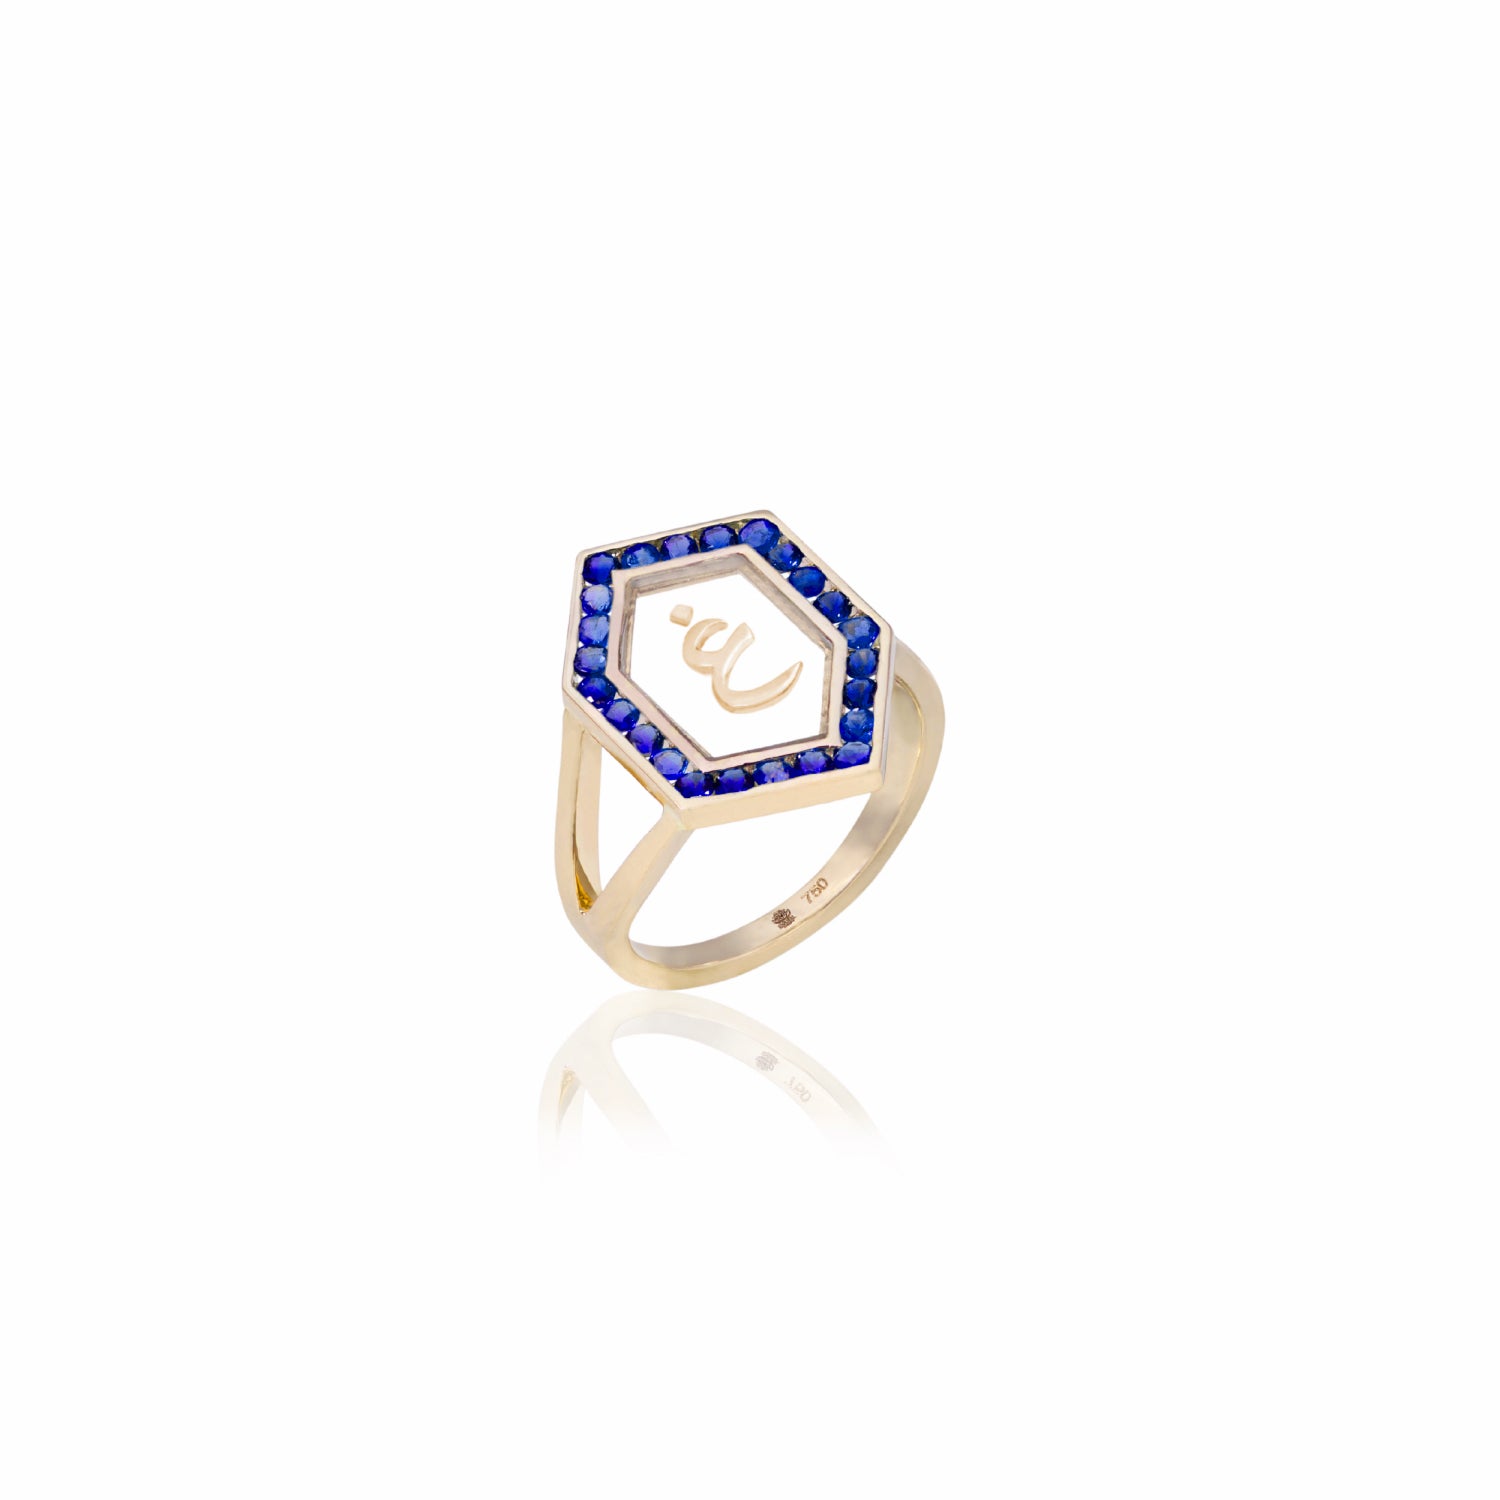 Qamoos 1.0 Letter غ Sapphire Ring in Yellow Gold